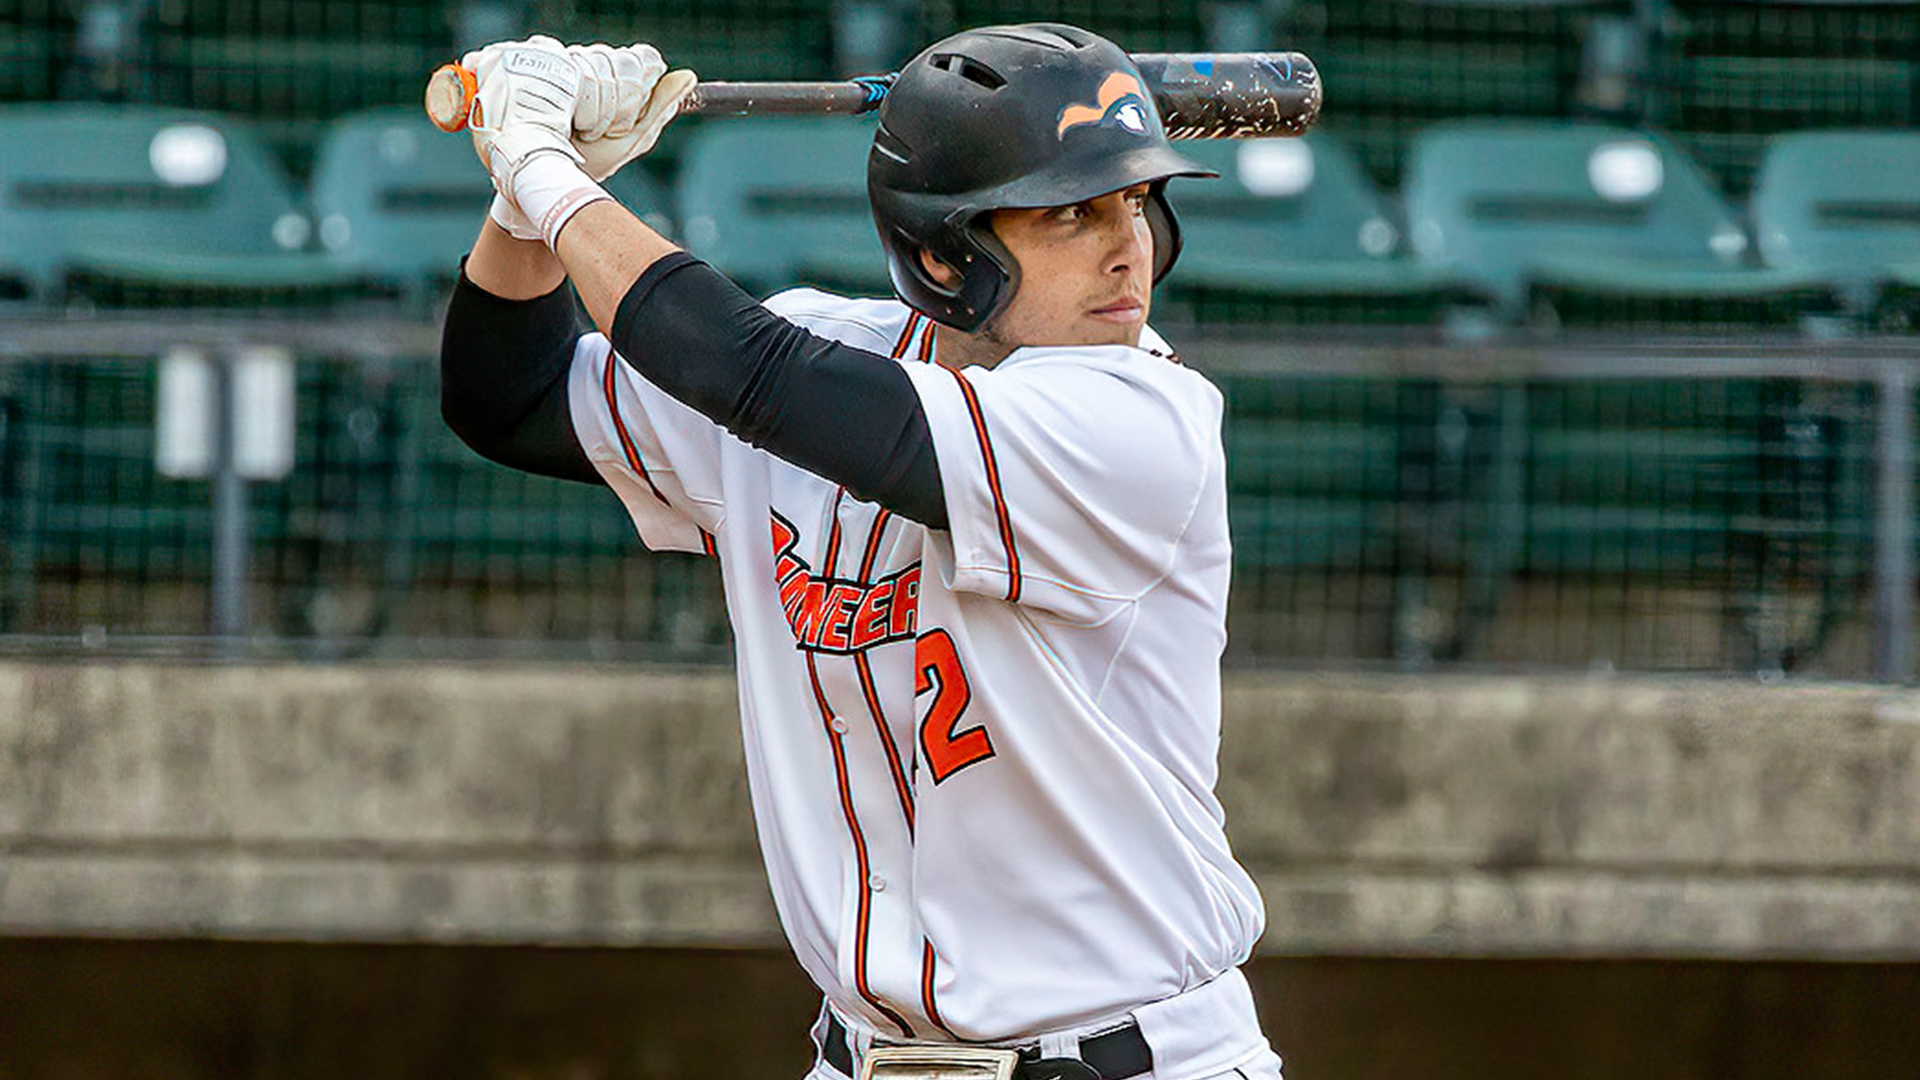 Ortega homer in the 11th lifts Pioneers to 8-7 win at West Georgia